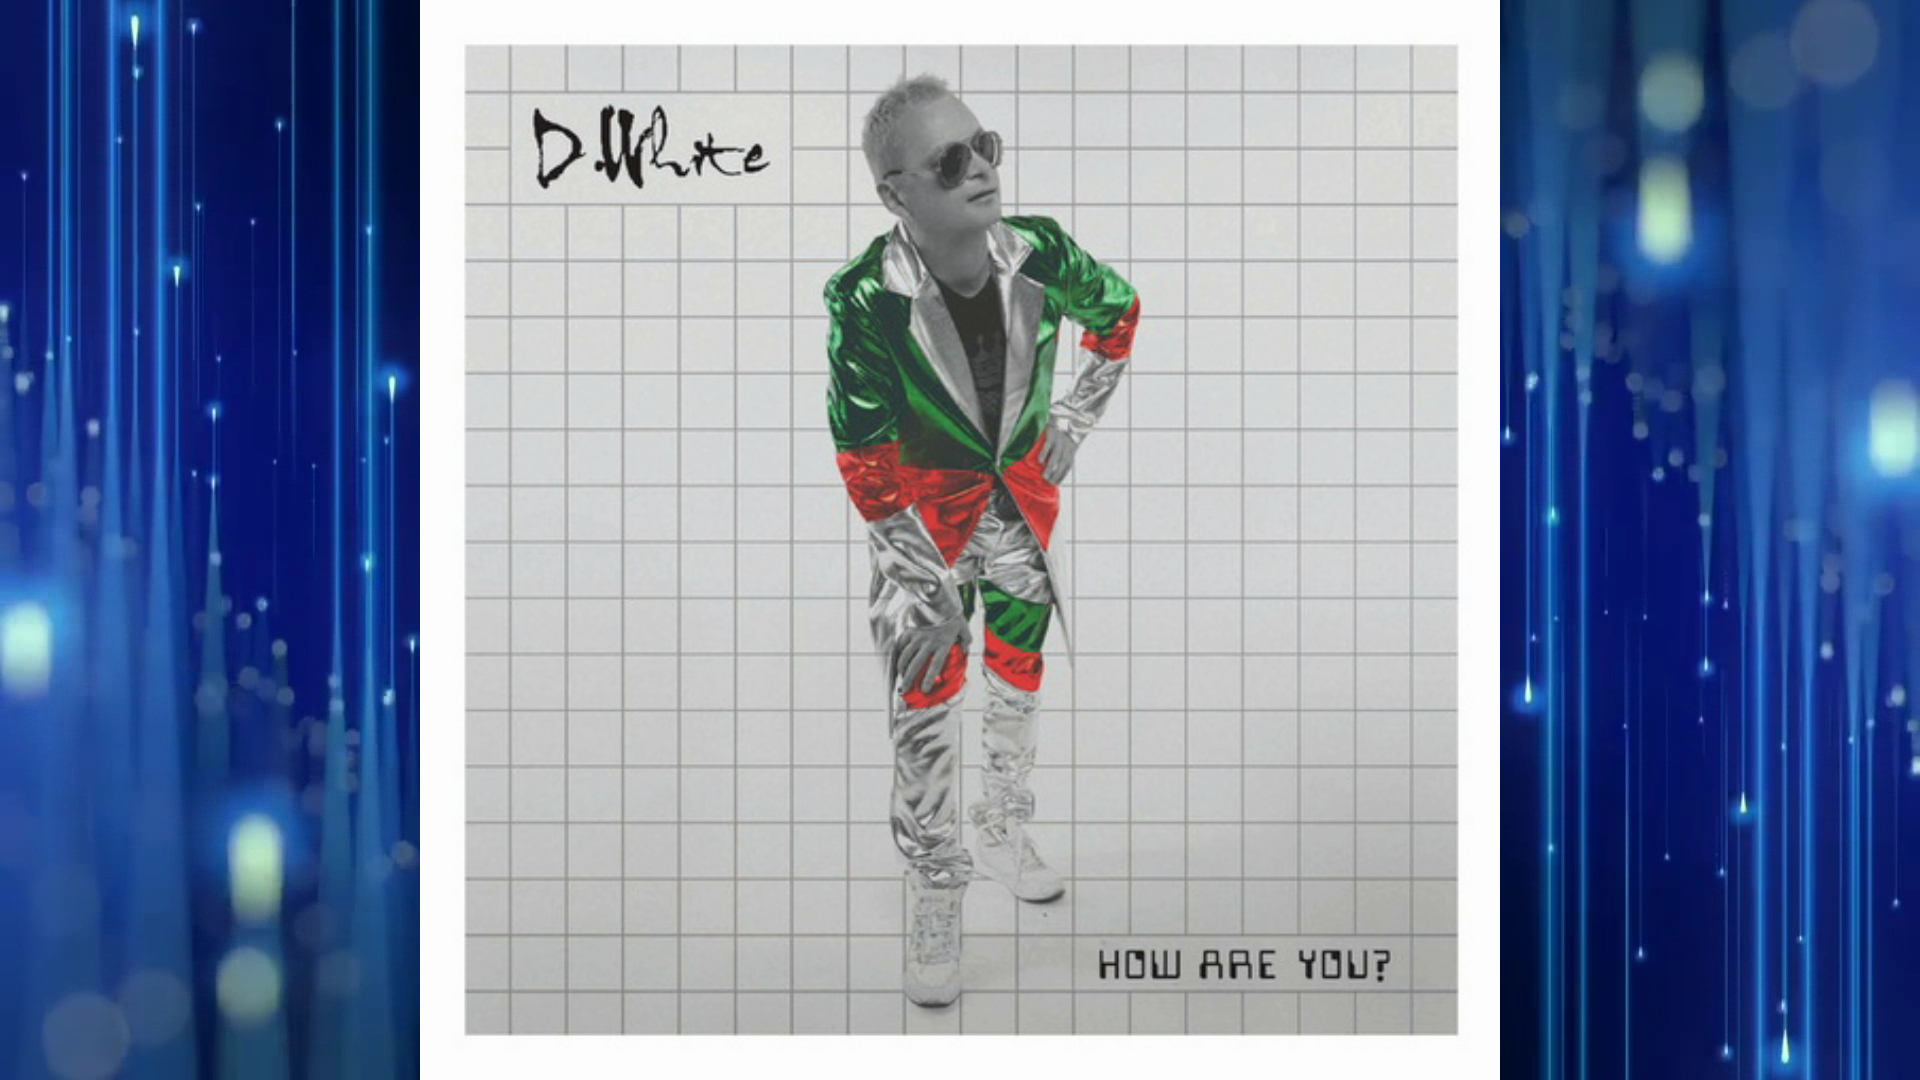 D.White - HOW ARE YOU? (Album). Best NEW Italo Disco, Music 80-90s, Modern Talking style, Super Song